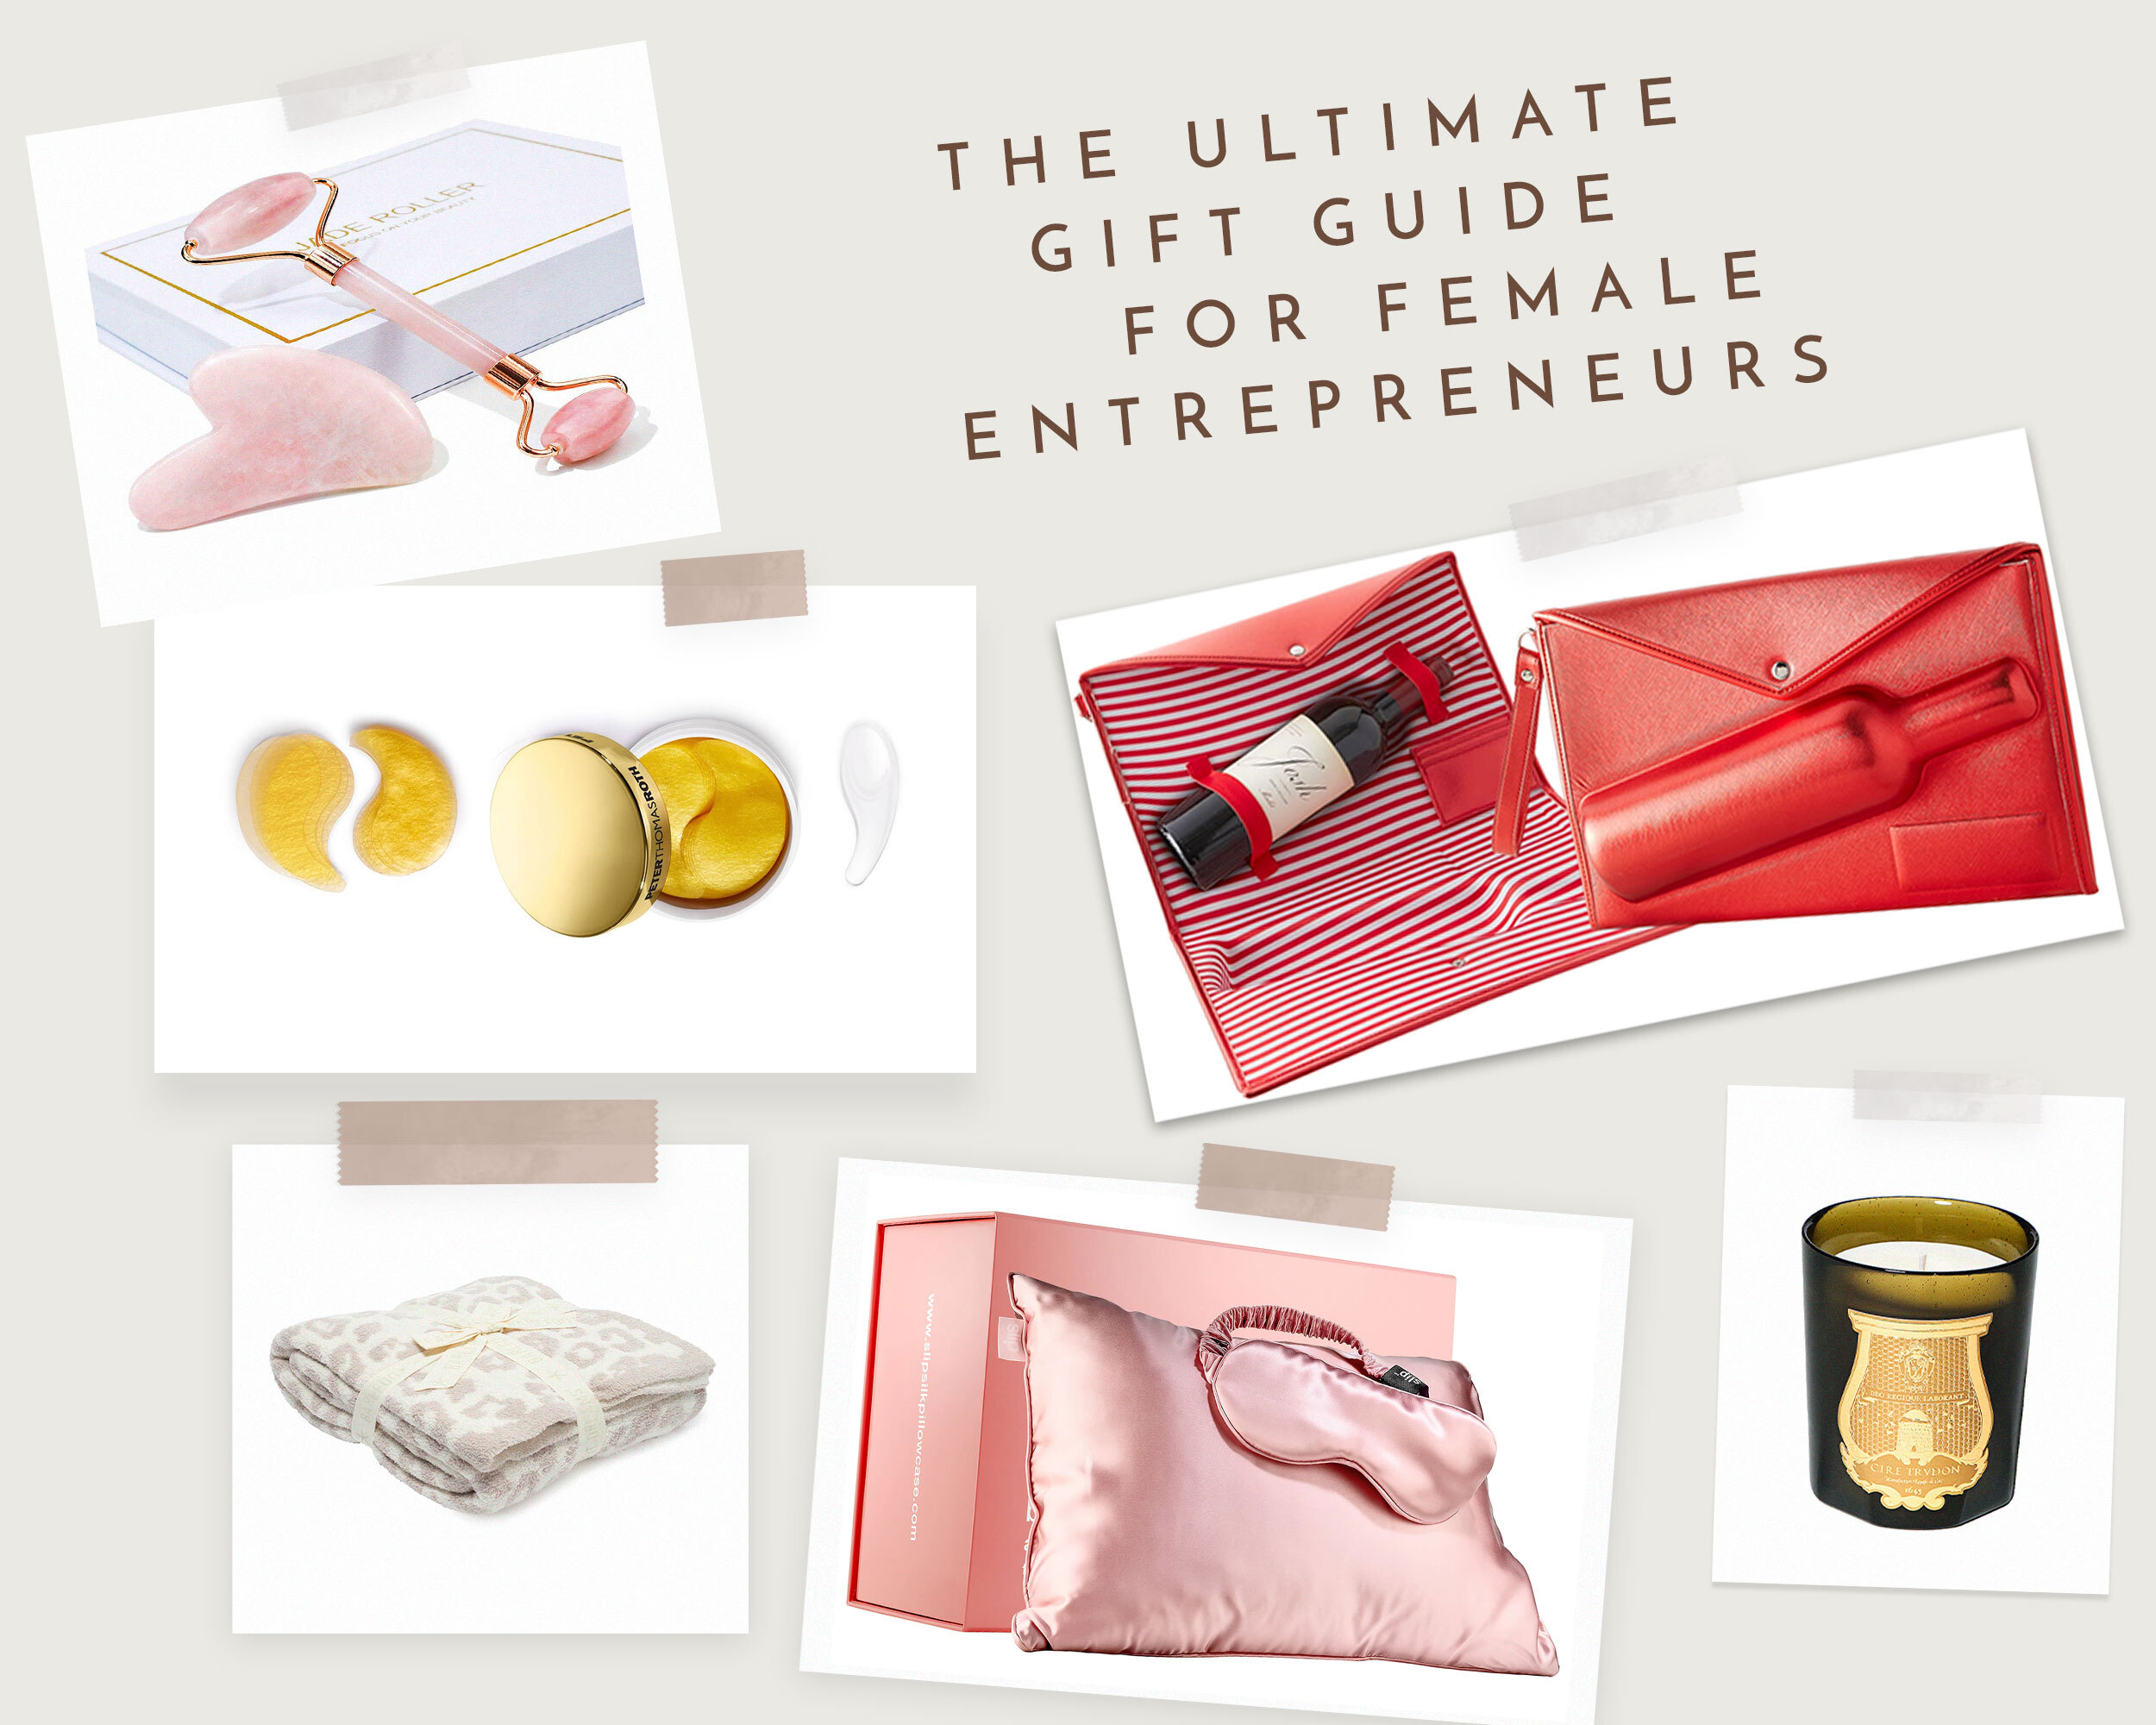 100+ Gifts for Female Entrepreneurs: the Ultimate Gift Guide